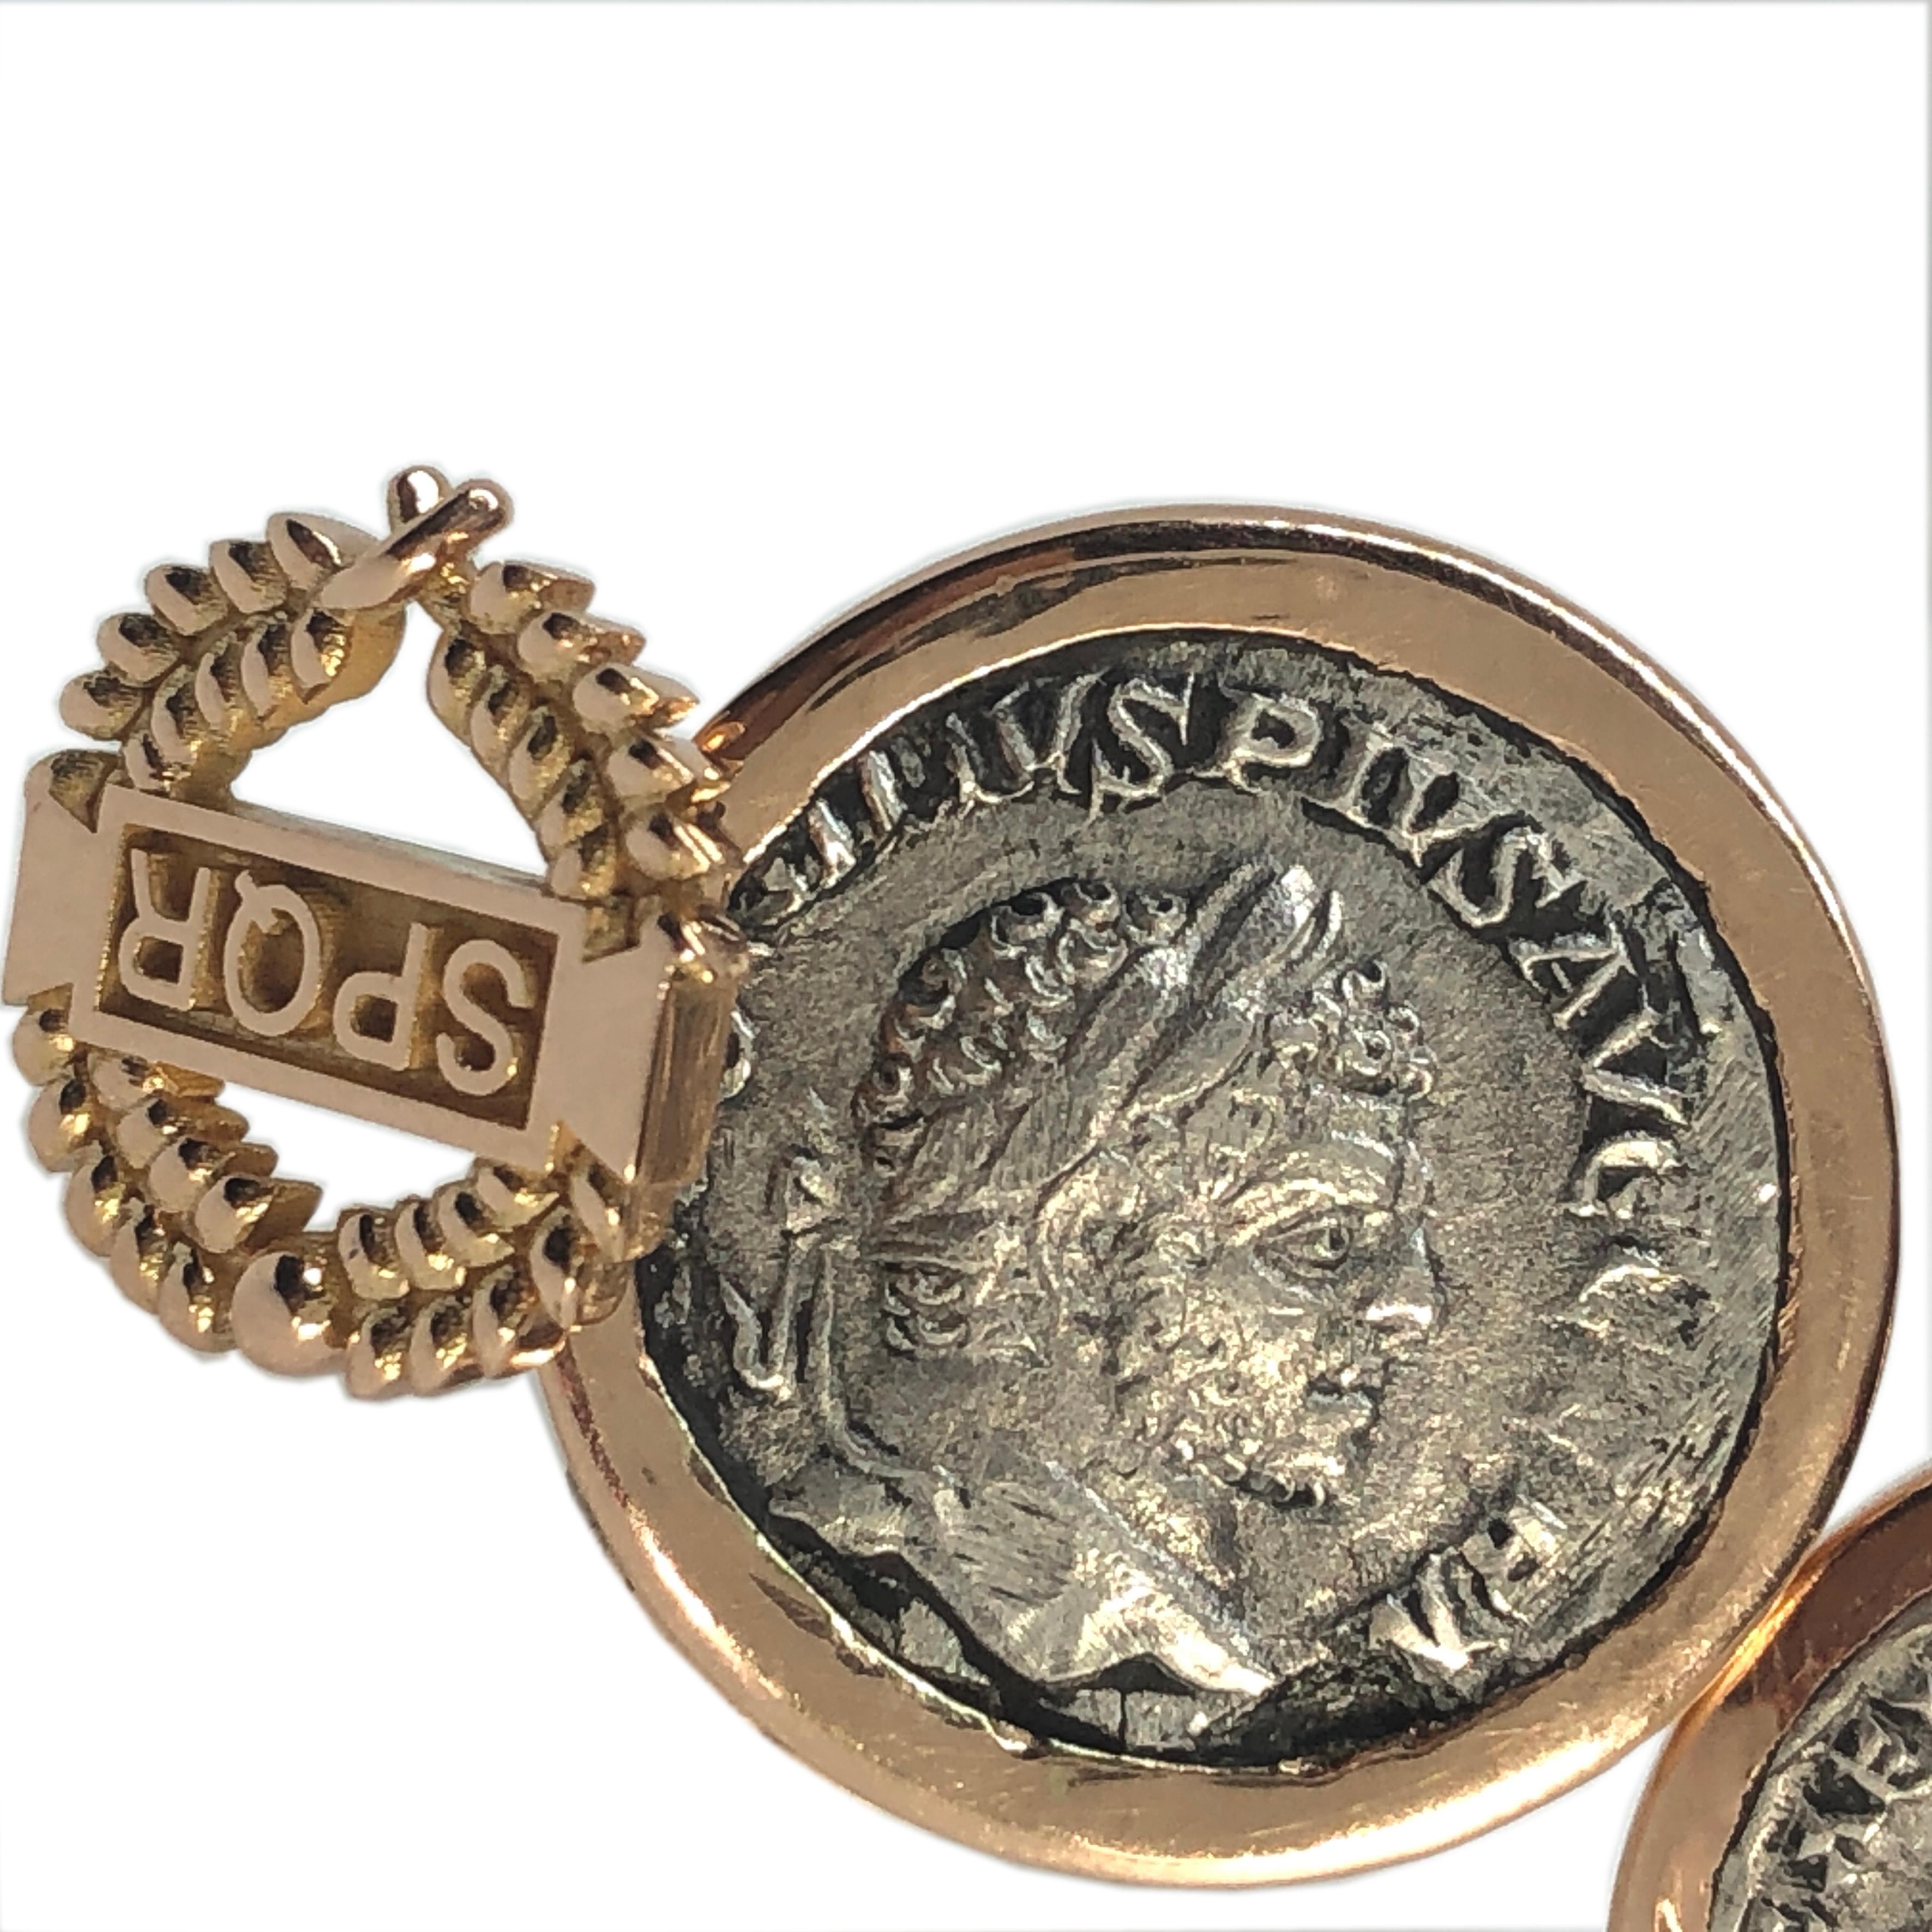 Original and One-of-a-kind 194 and 215 A.D. Roman Silver Coin featuring Emperors Septimius Severus and his Son Caracalla, SPQR, Senatus Populusque Romanus (the symbol of Roman Power) Back in an 18Kt Yellow Gold Setting. Emperor's Name and Coinage